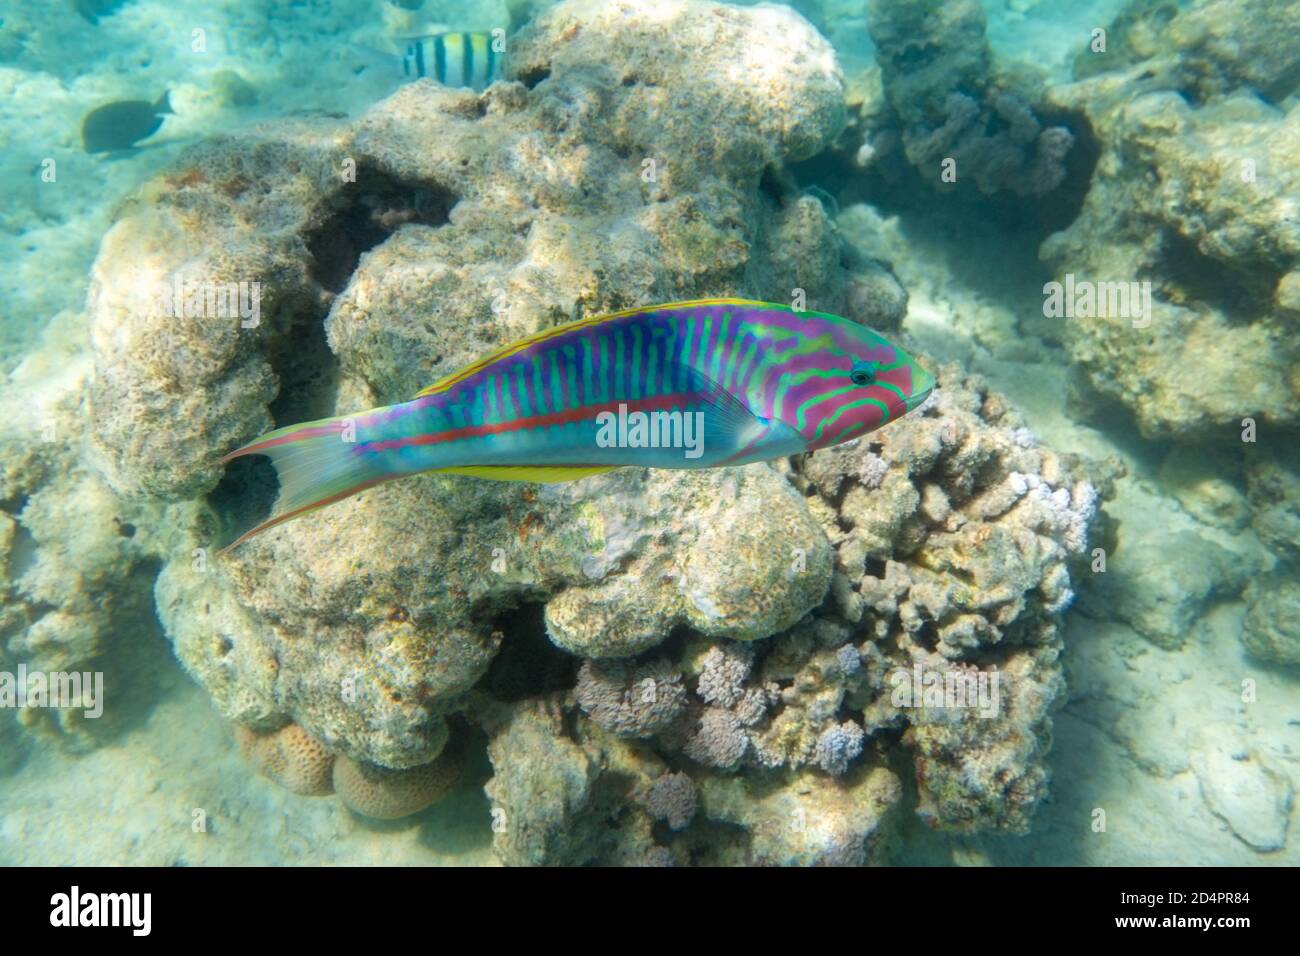 Thalassoma Pavo (Mediterranean rainbow wrasse, Coris julis) near coral reef in the ocean, close up, side view. Colorful striped tropical fish in Red S Stock Photo